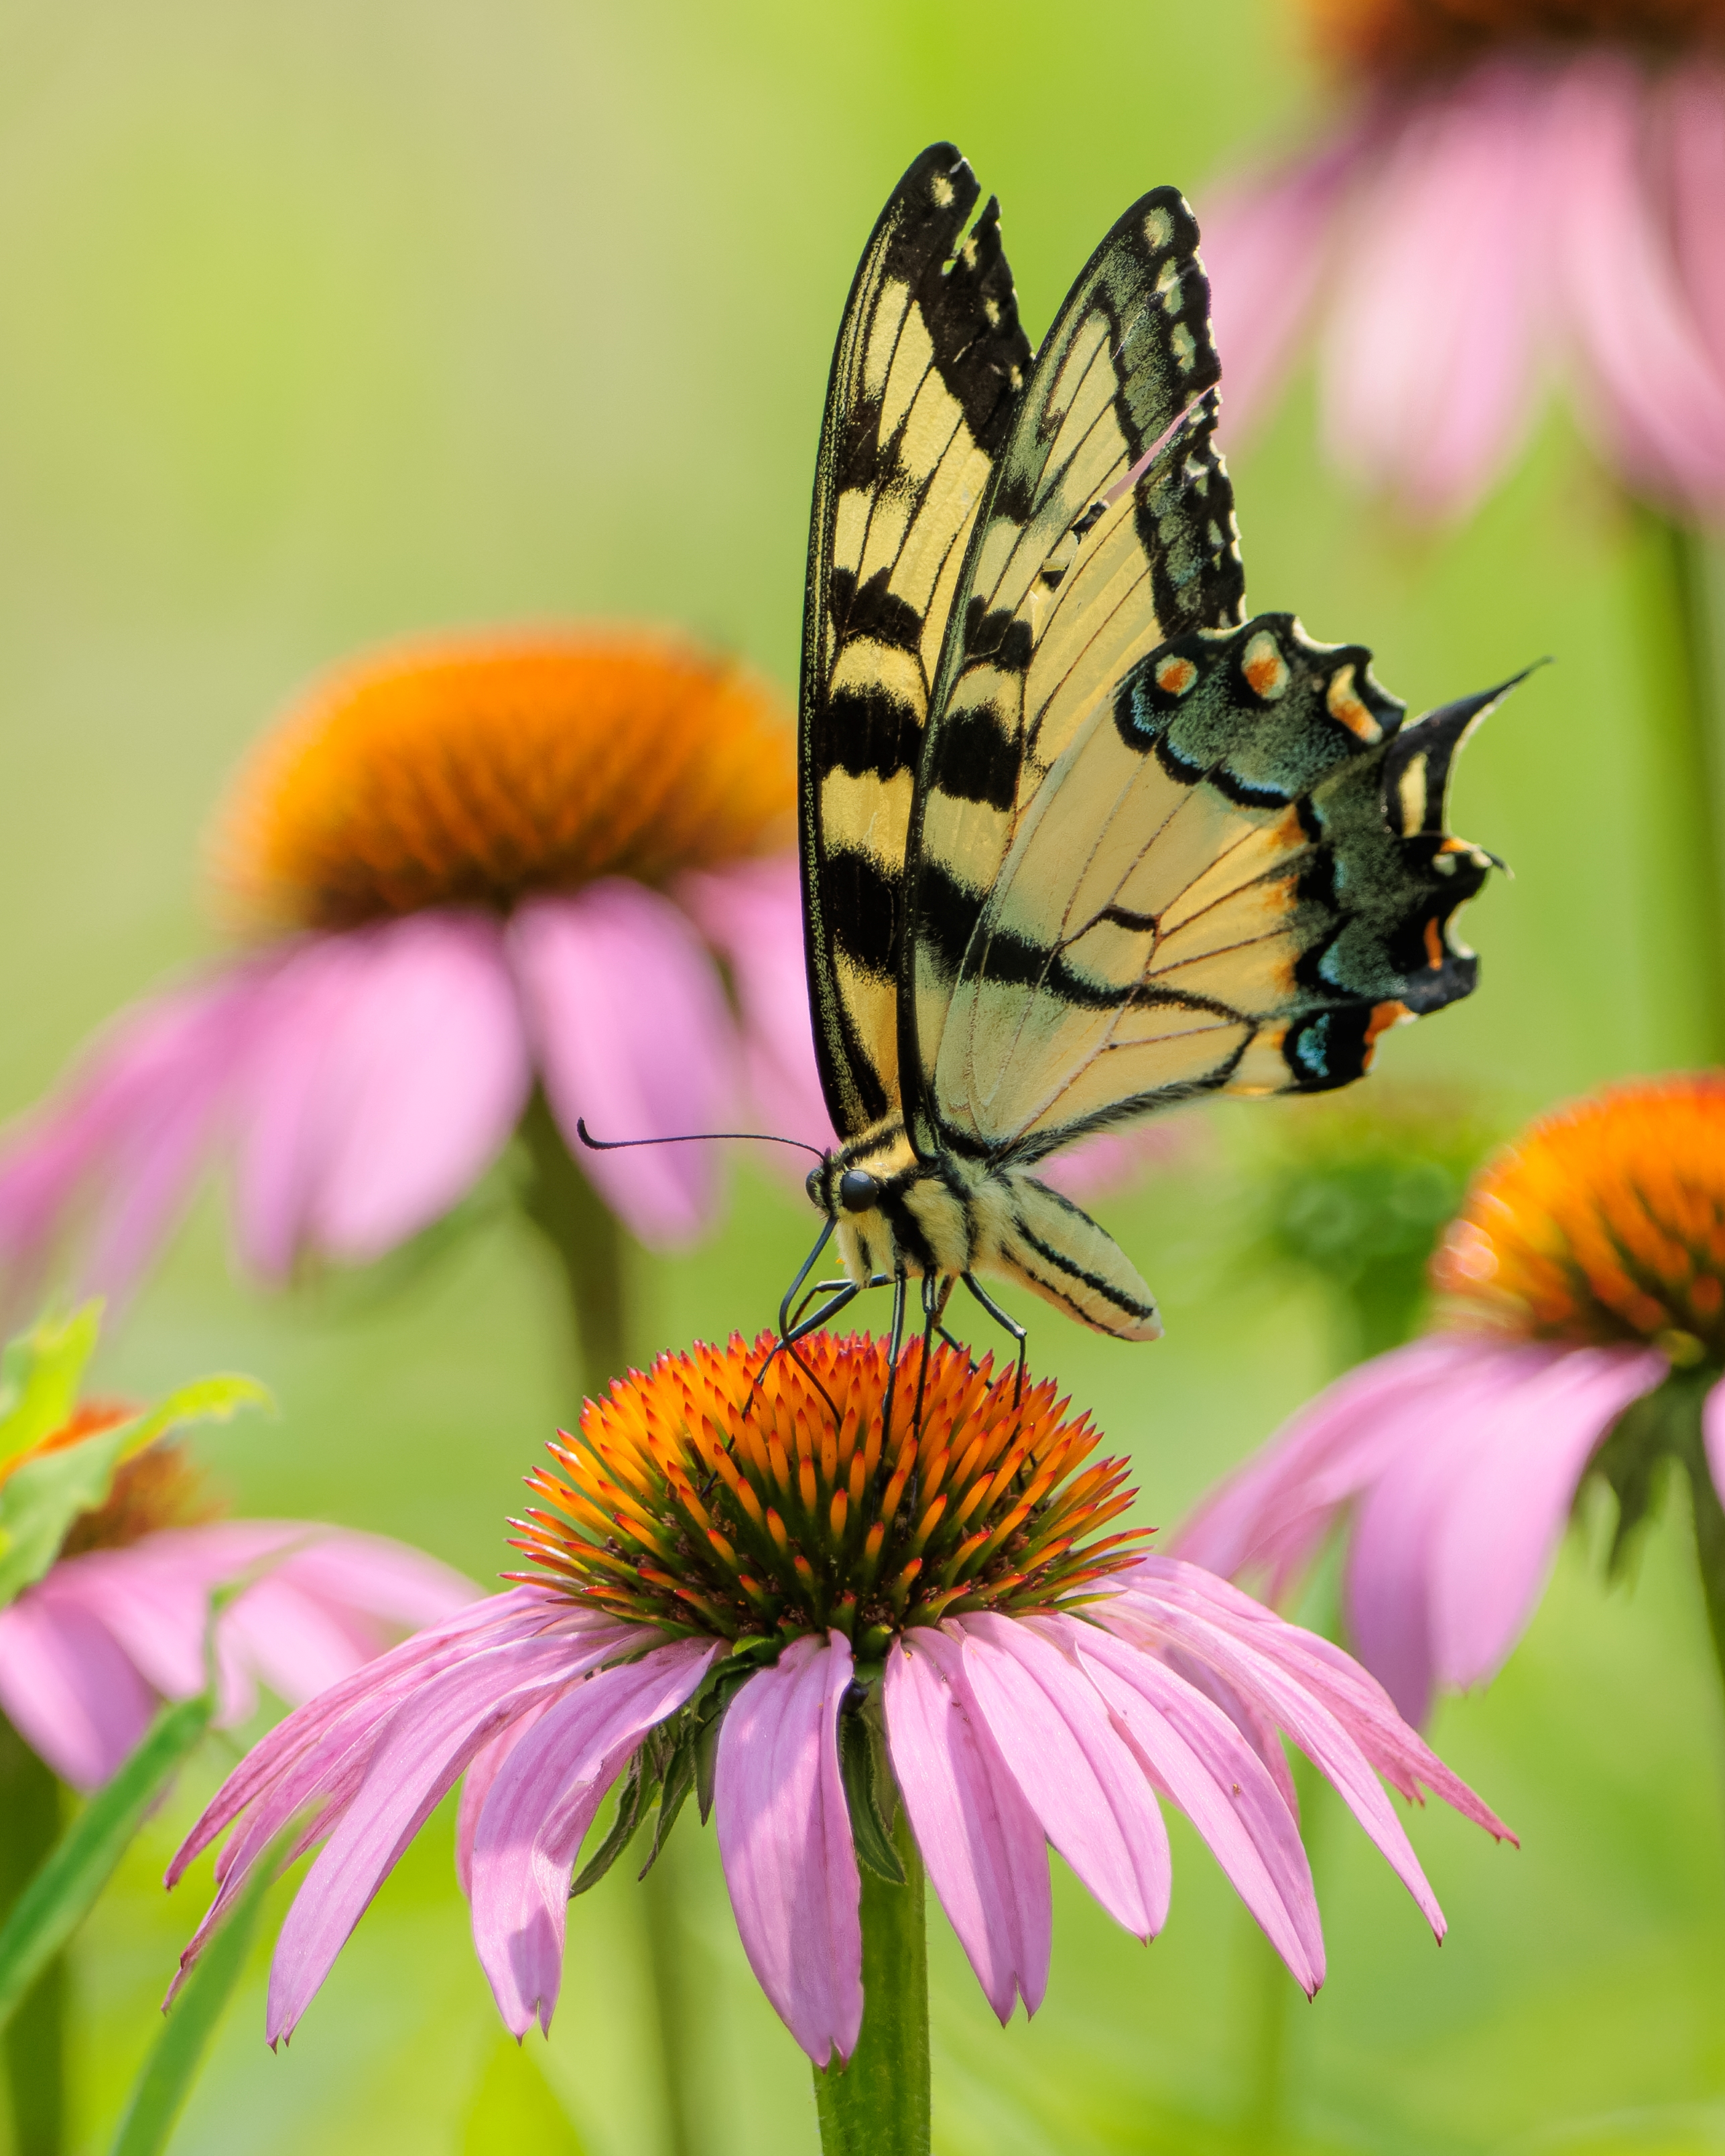 A tiger swallowtail butterfly on a purple coneflower.